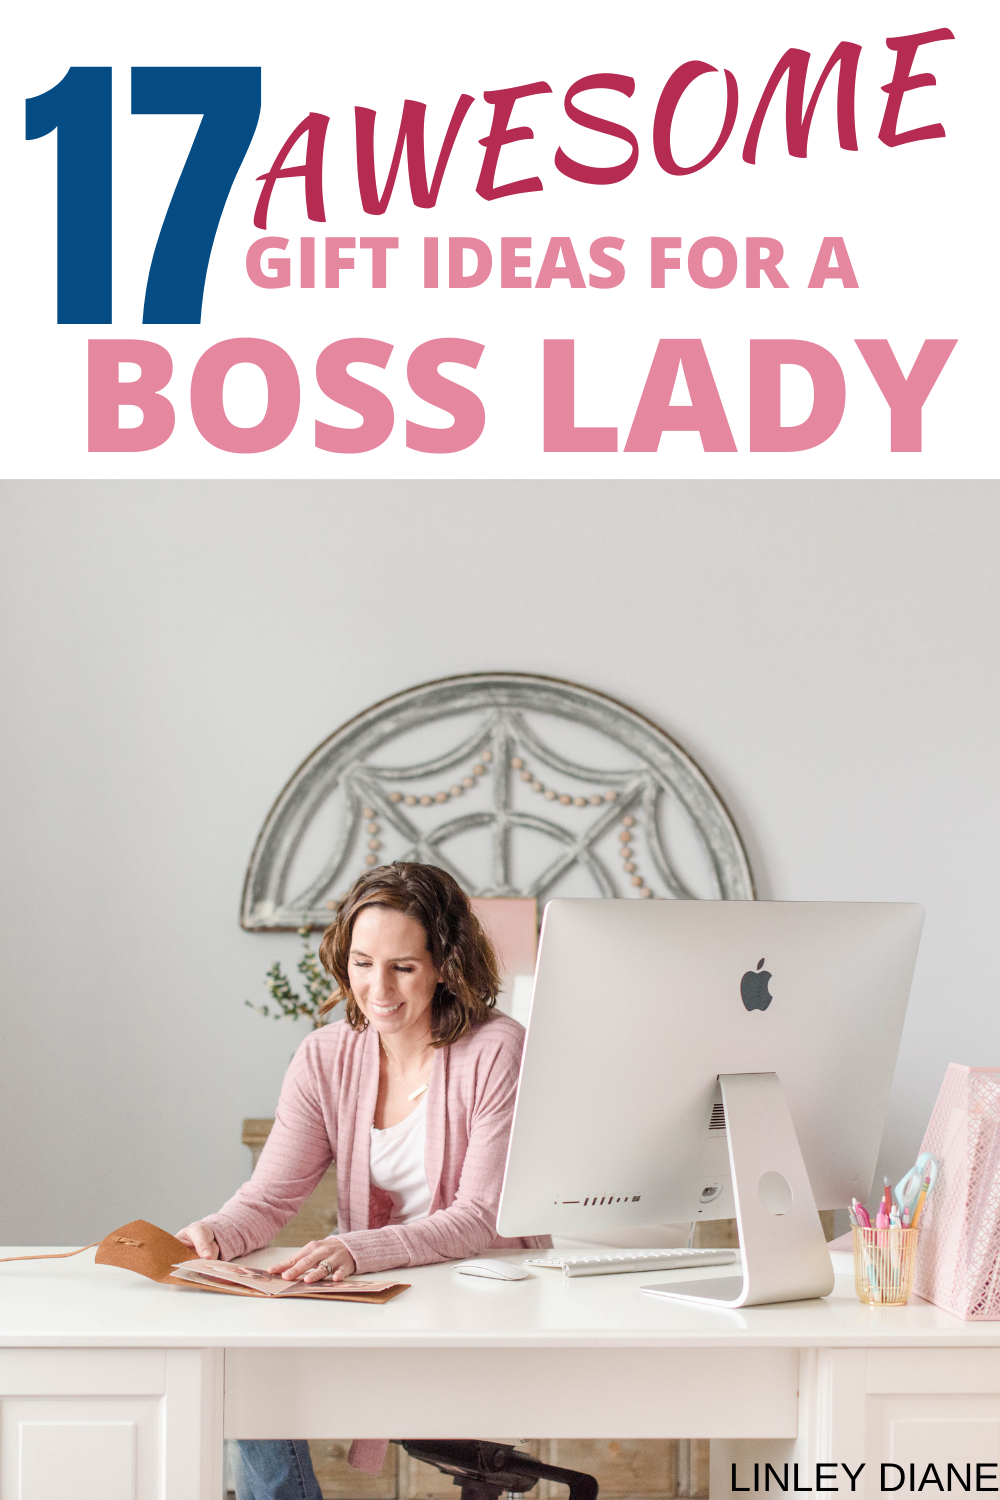 Attractive personalized office gifts for women by hansonellis - Issuu